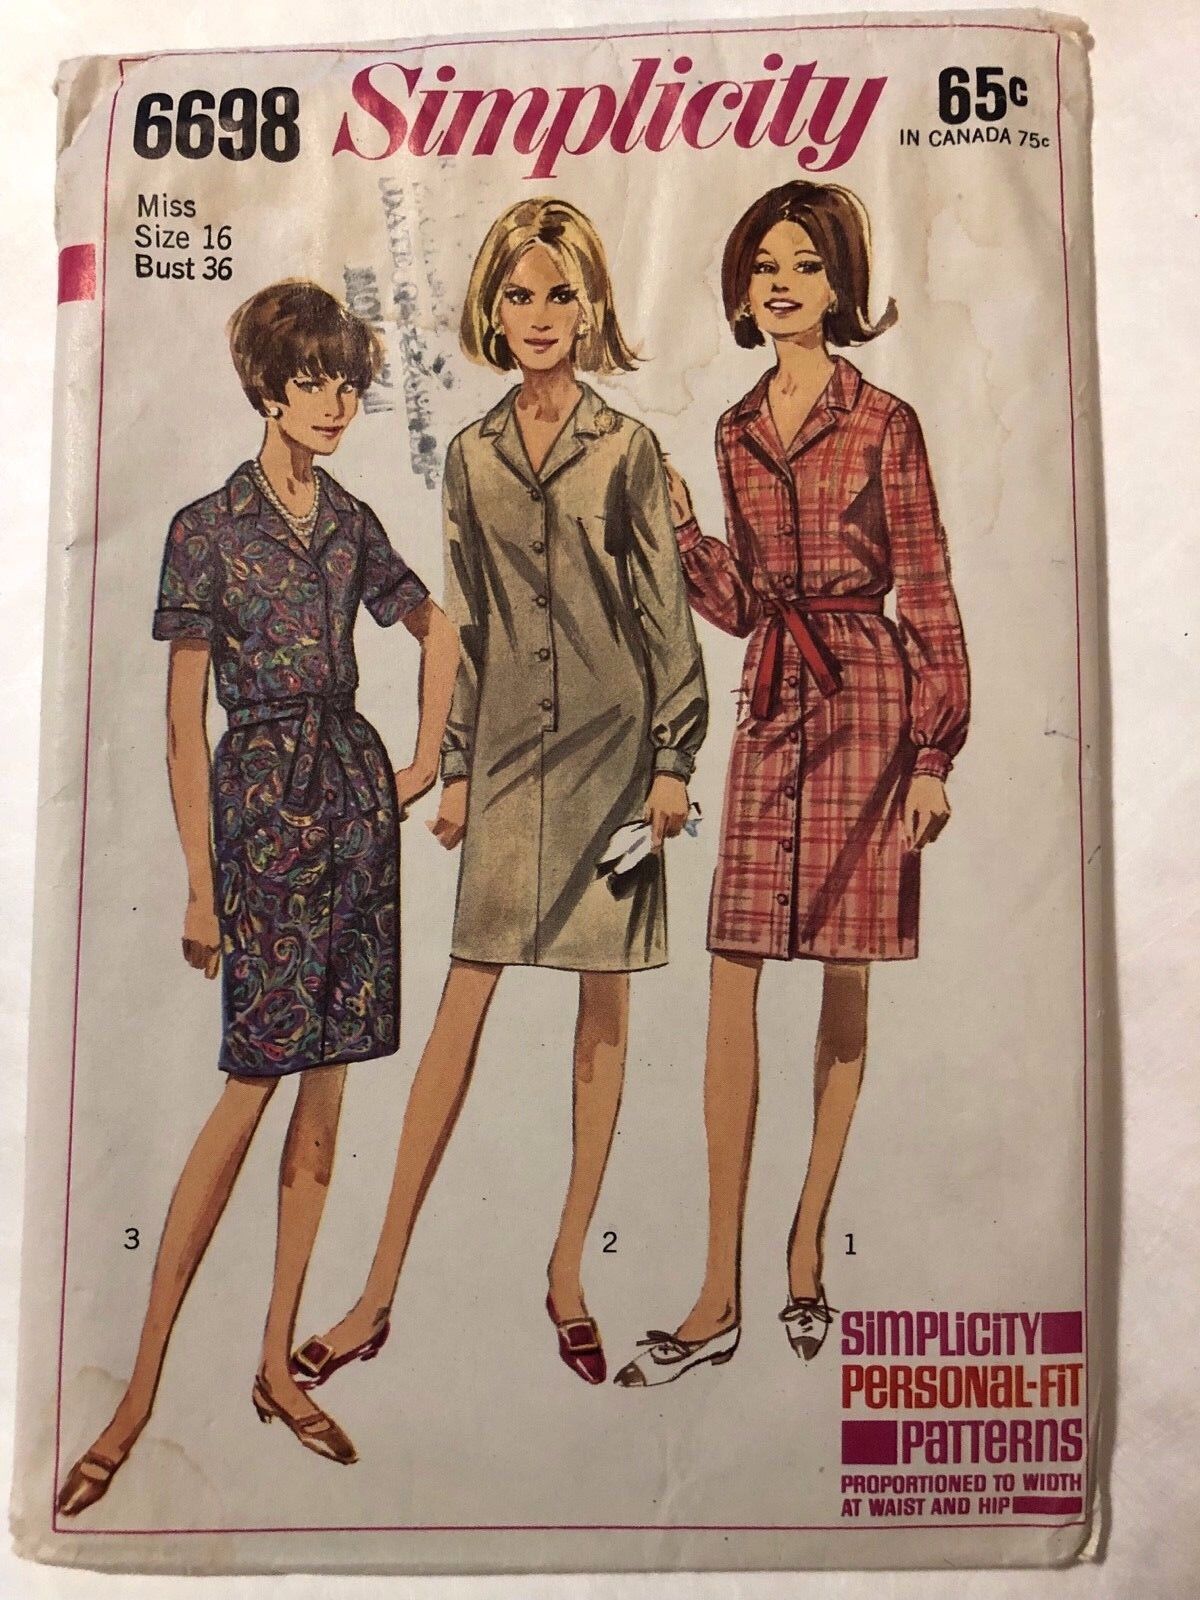 Vintage 1966 Simplicity Pattern 6698 Women's Belted Dress Sewing Clothes Size 16